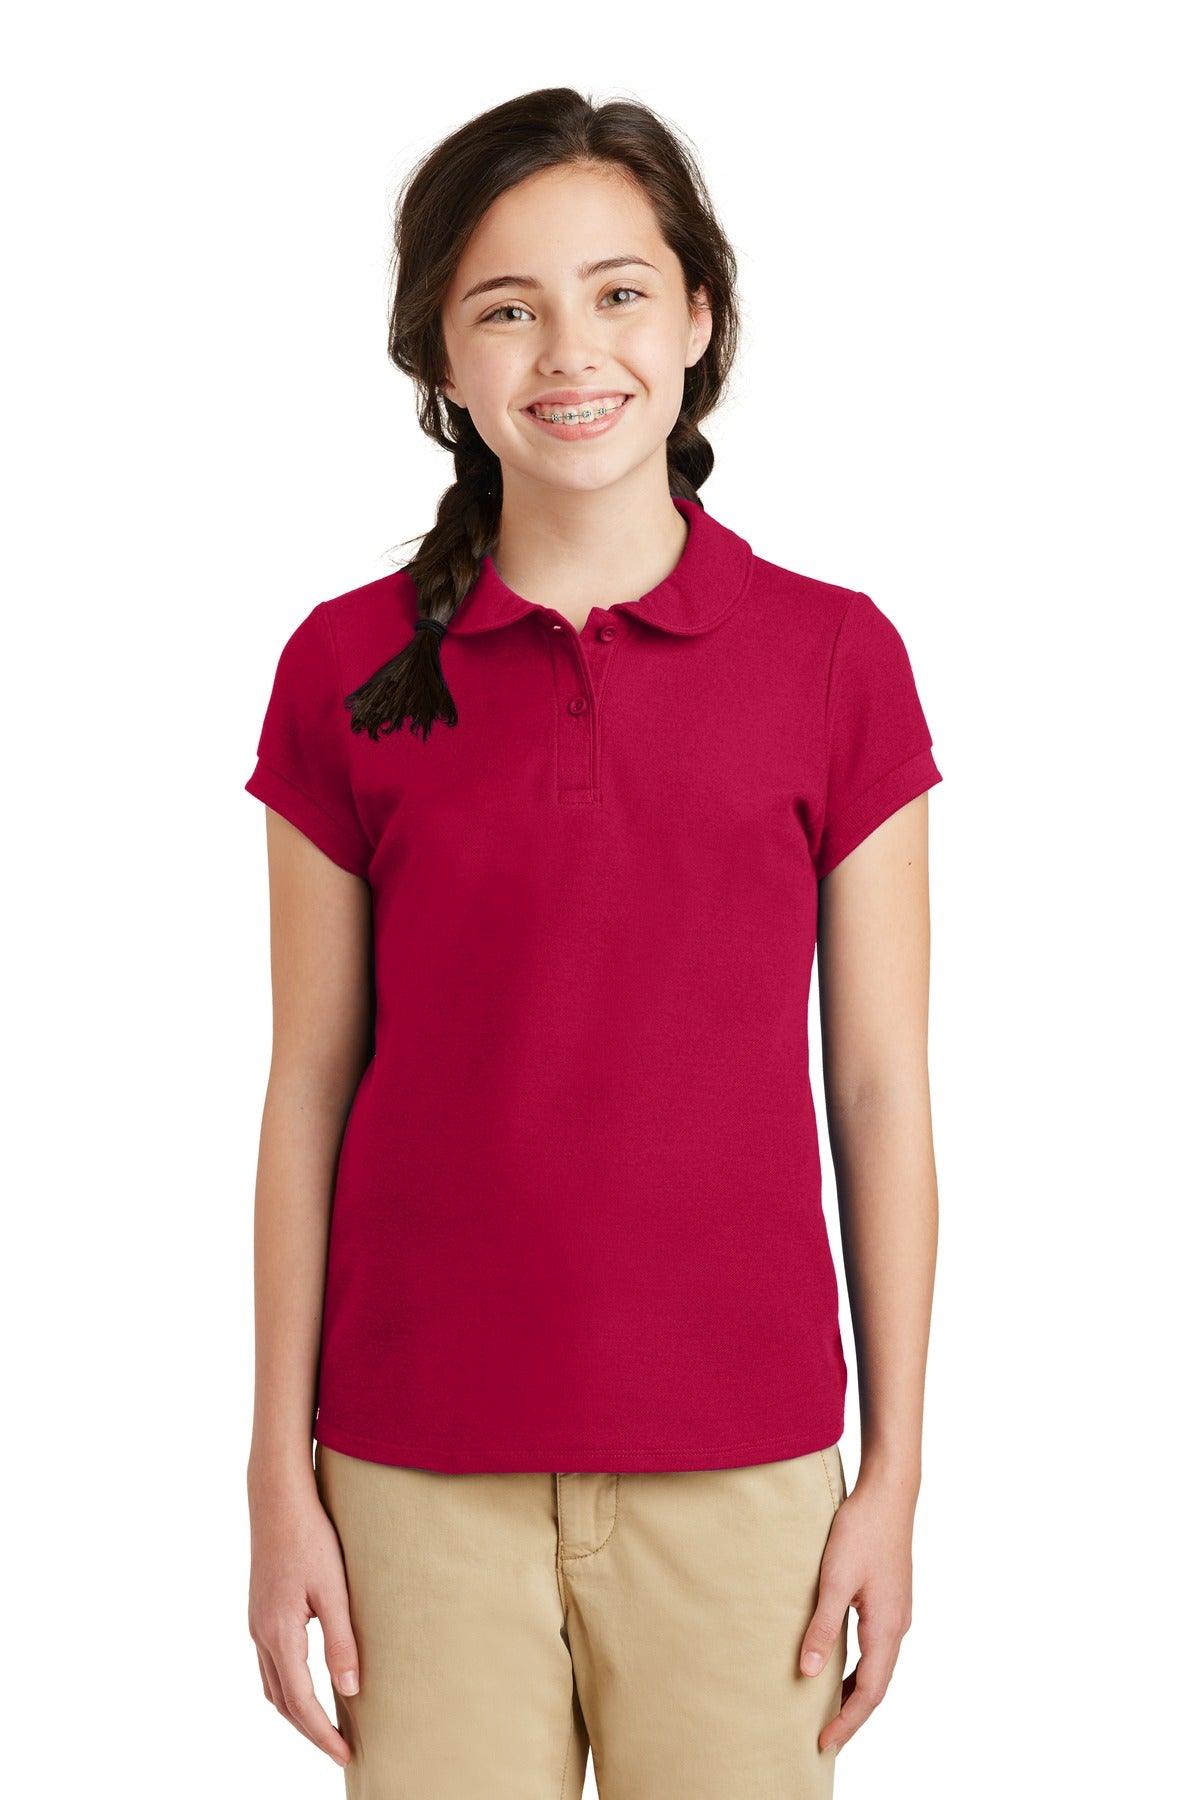 Port Authority Girls Silk Touch Peter Pan Collar Polo. YG503 - Dresses Max